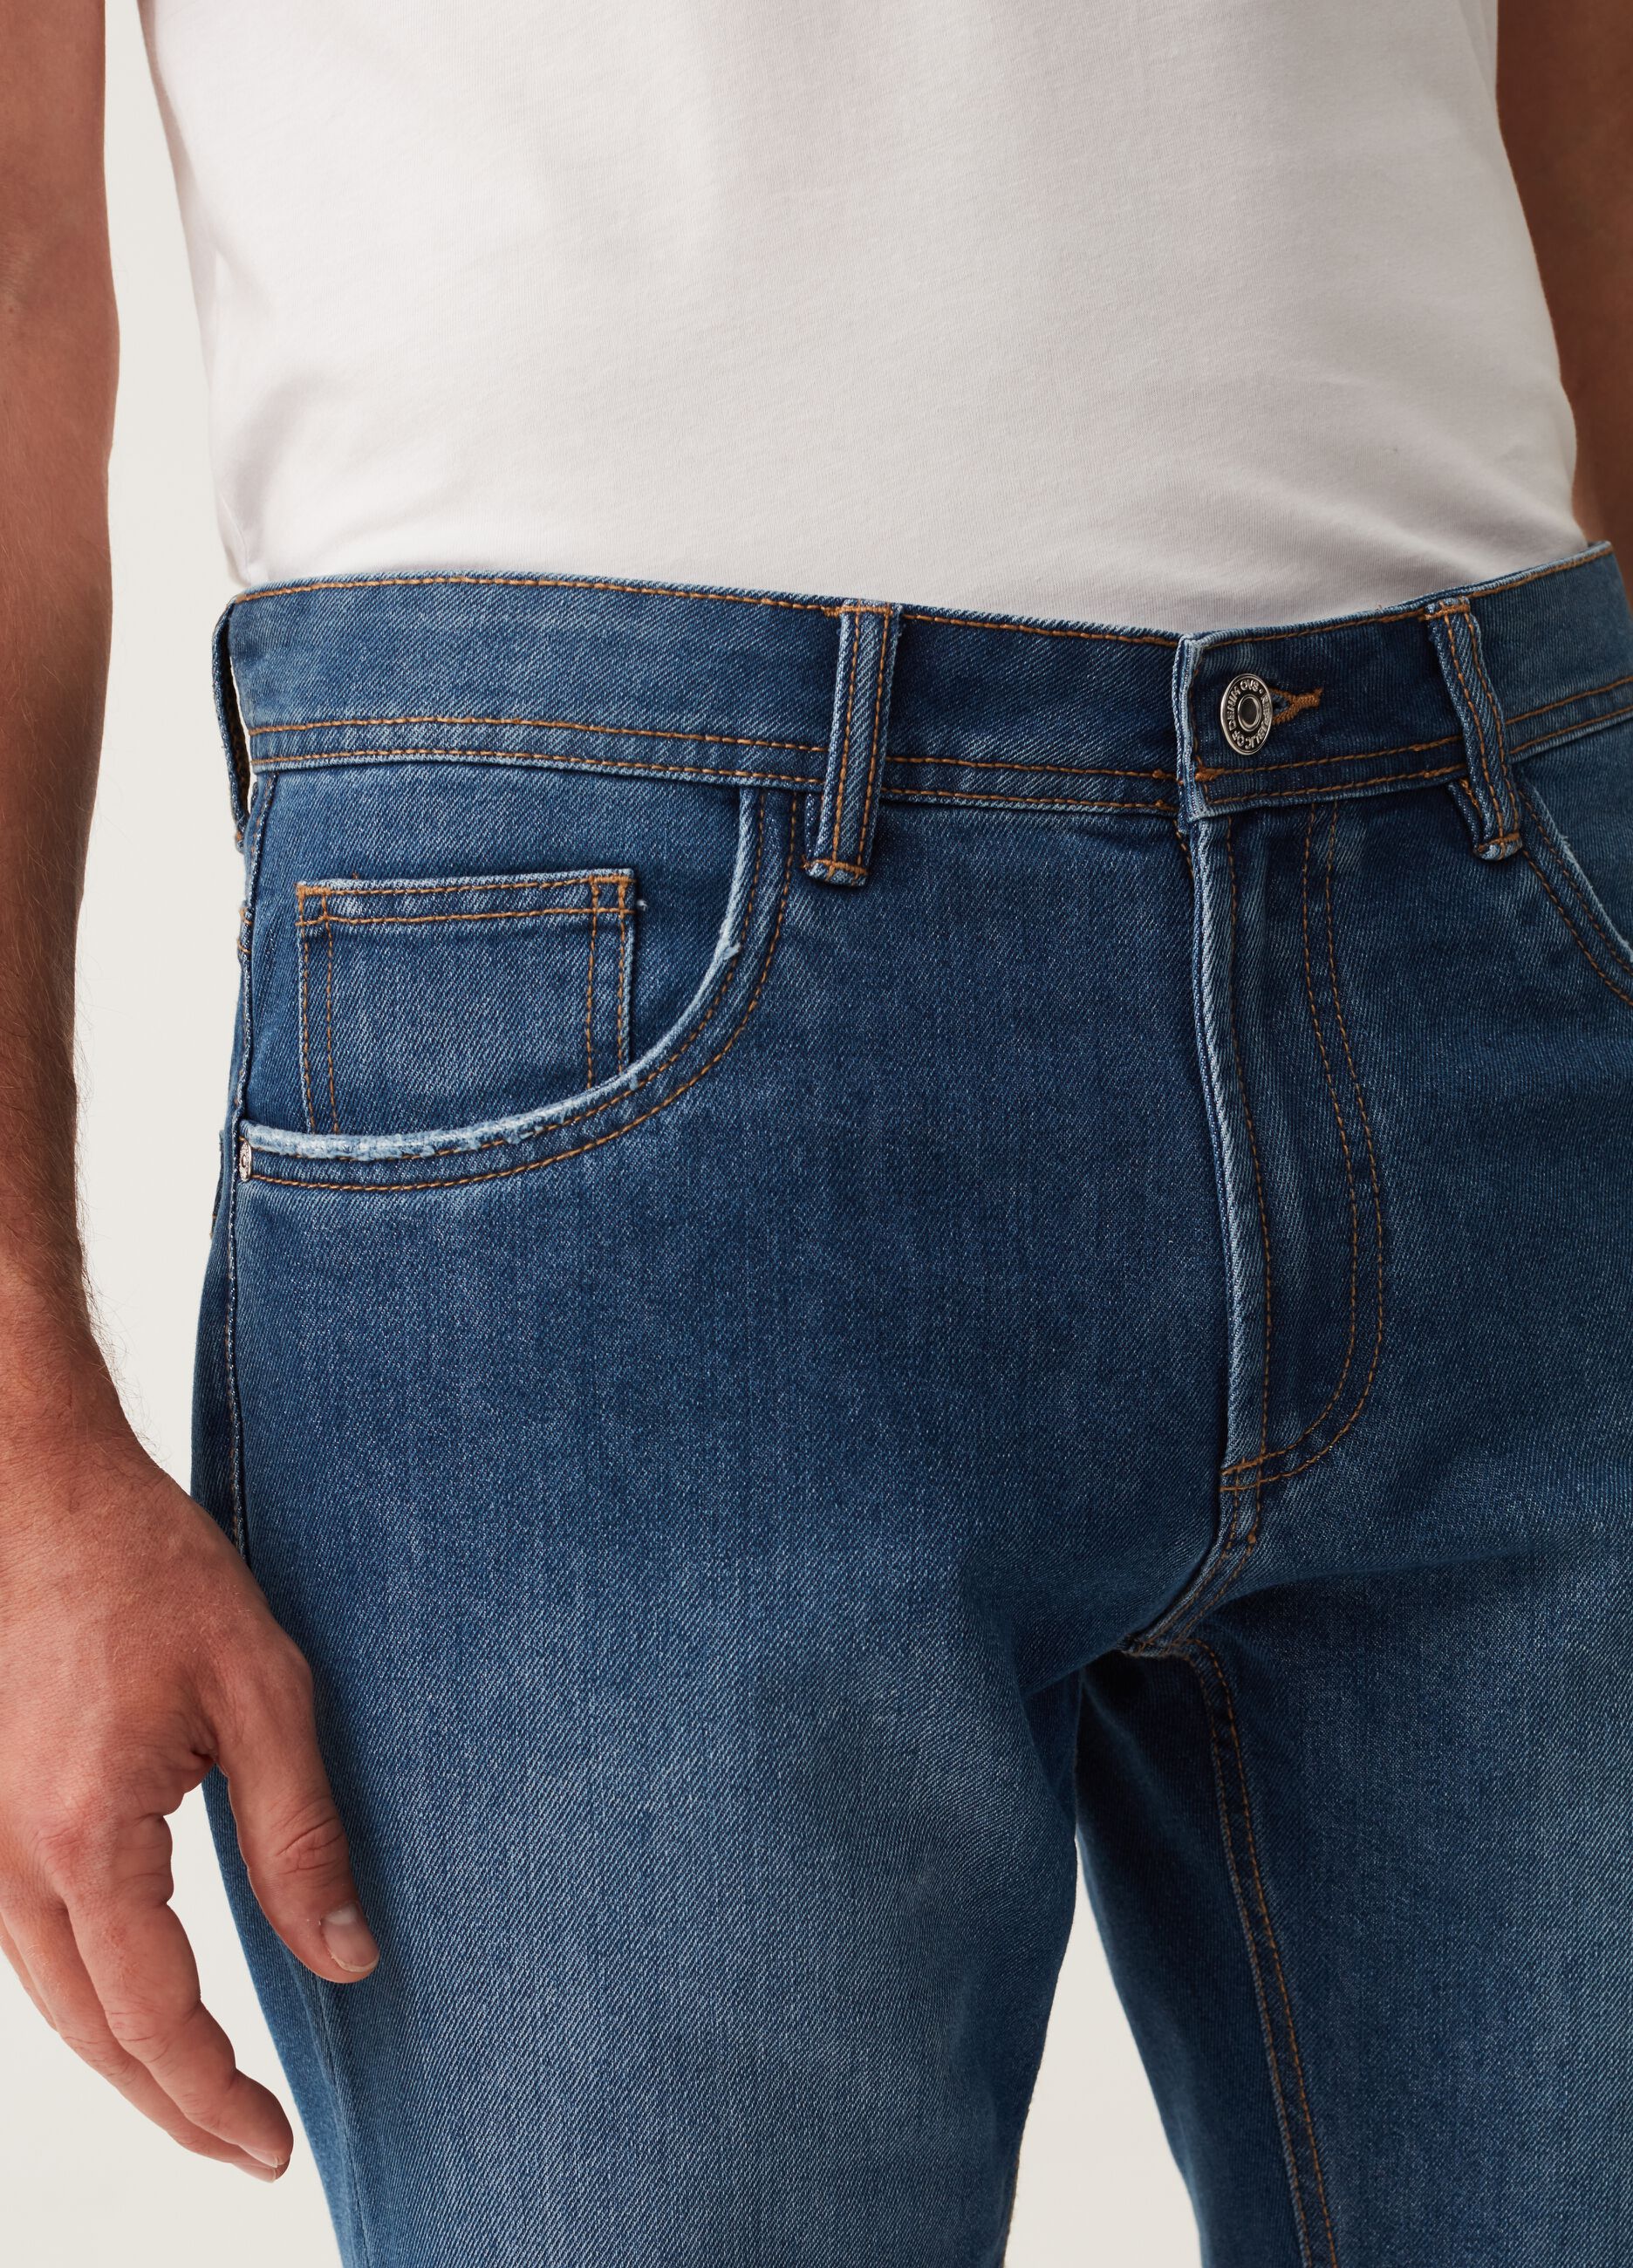 Slim-fit Bermuda shorts with five pockets